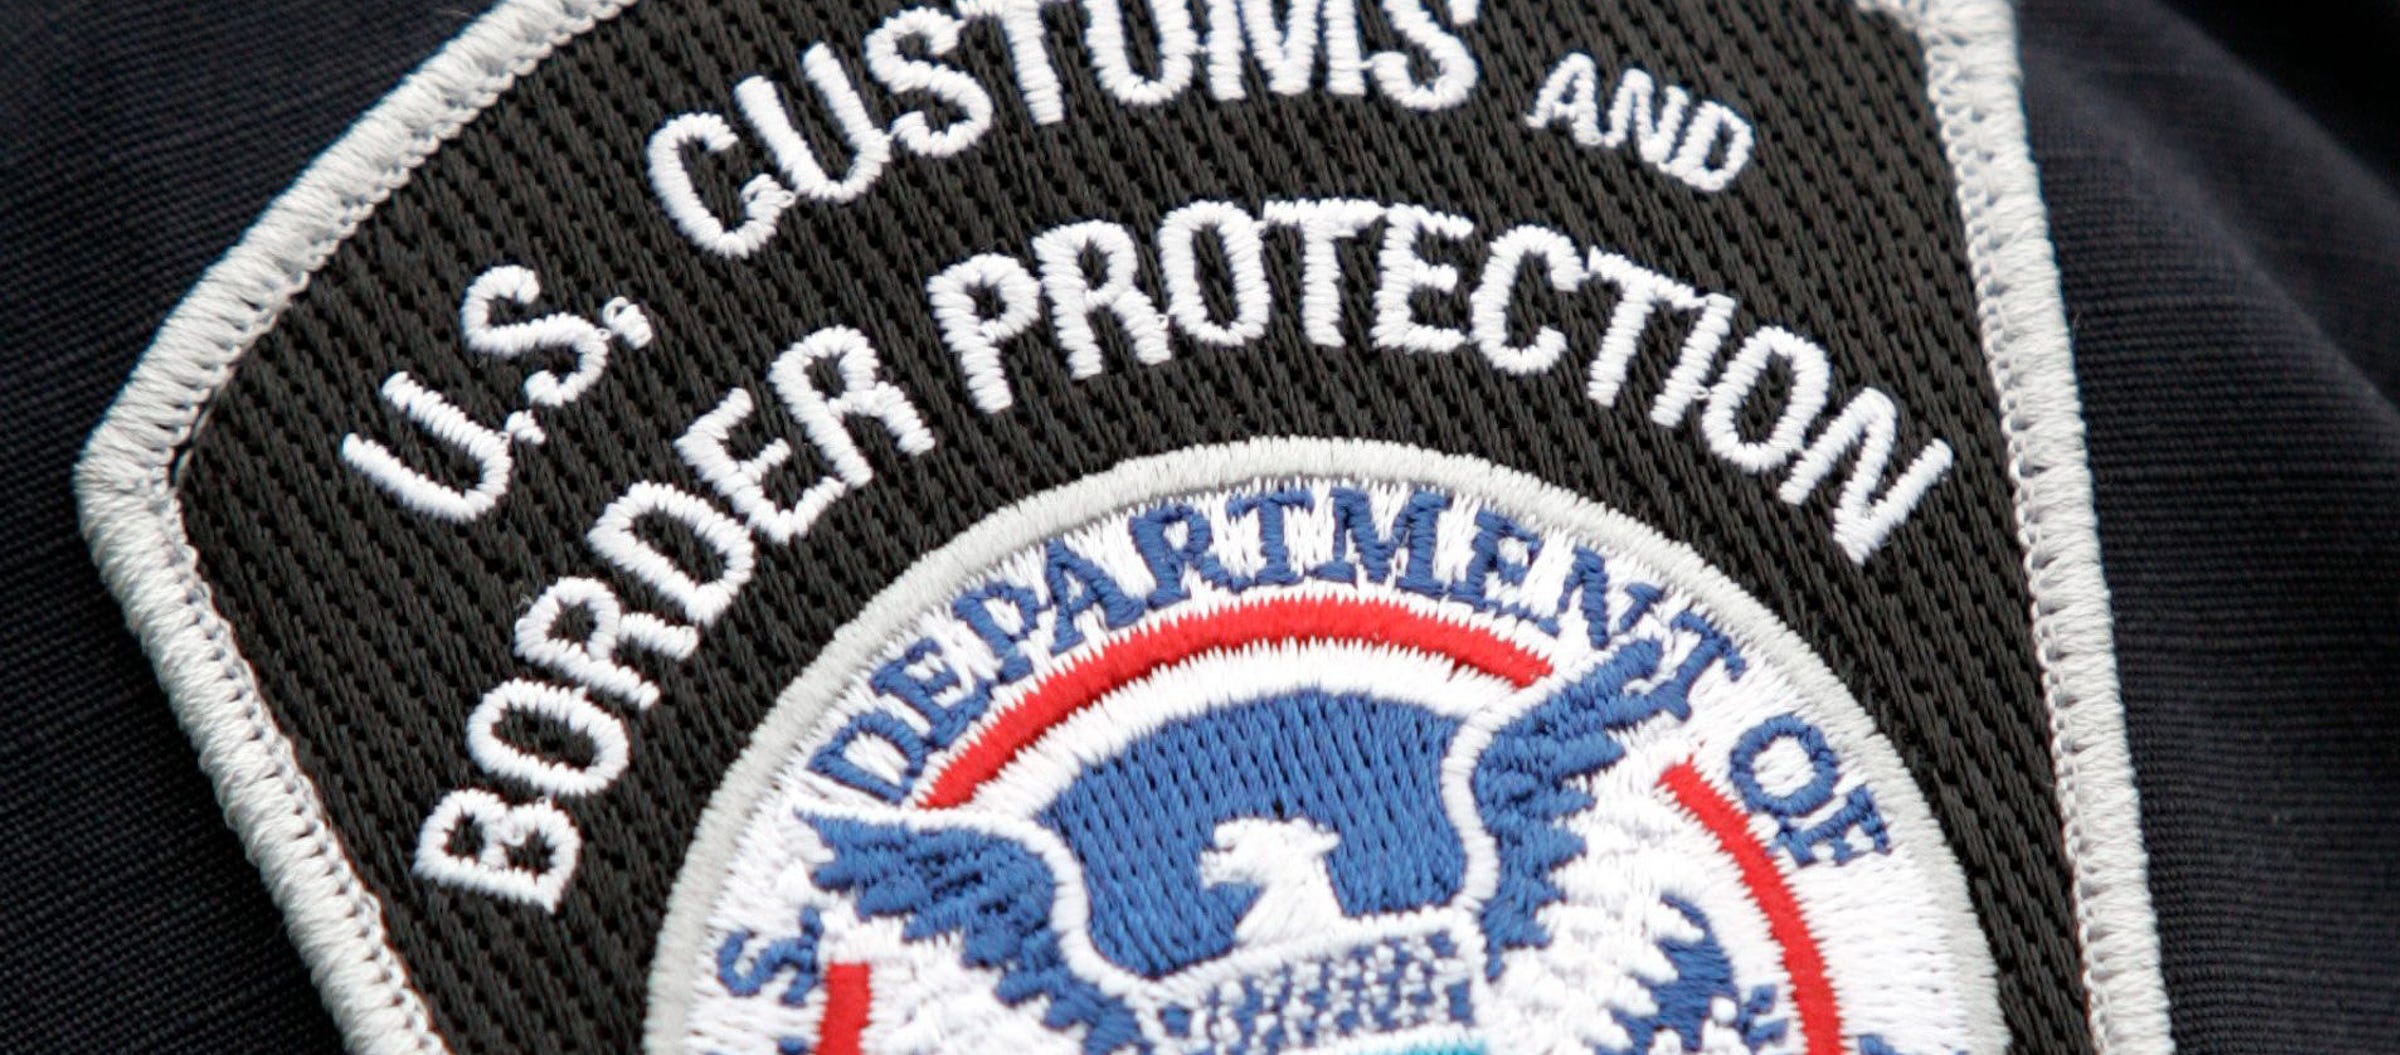 Very tight close up photo of a U.S. Customs and Border Agent sleeve badge